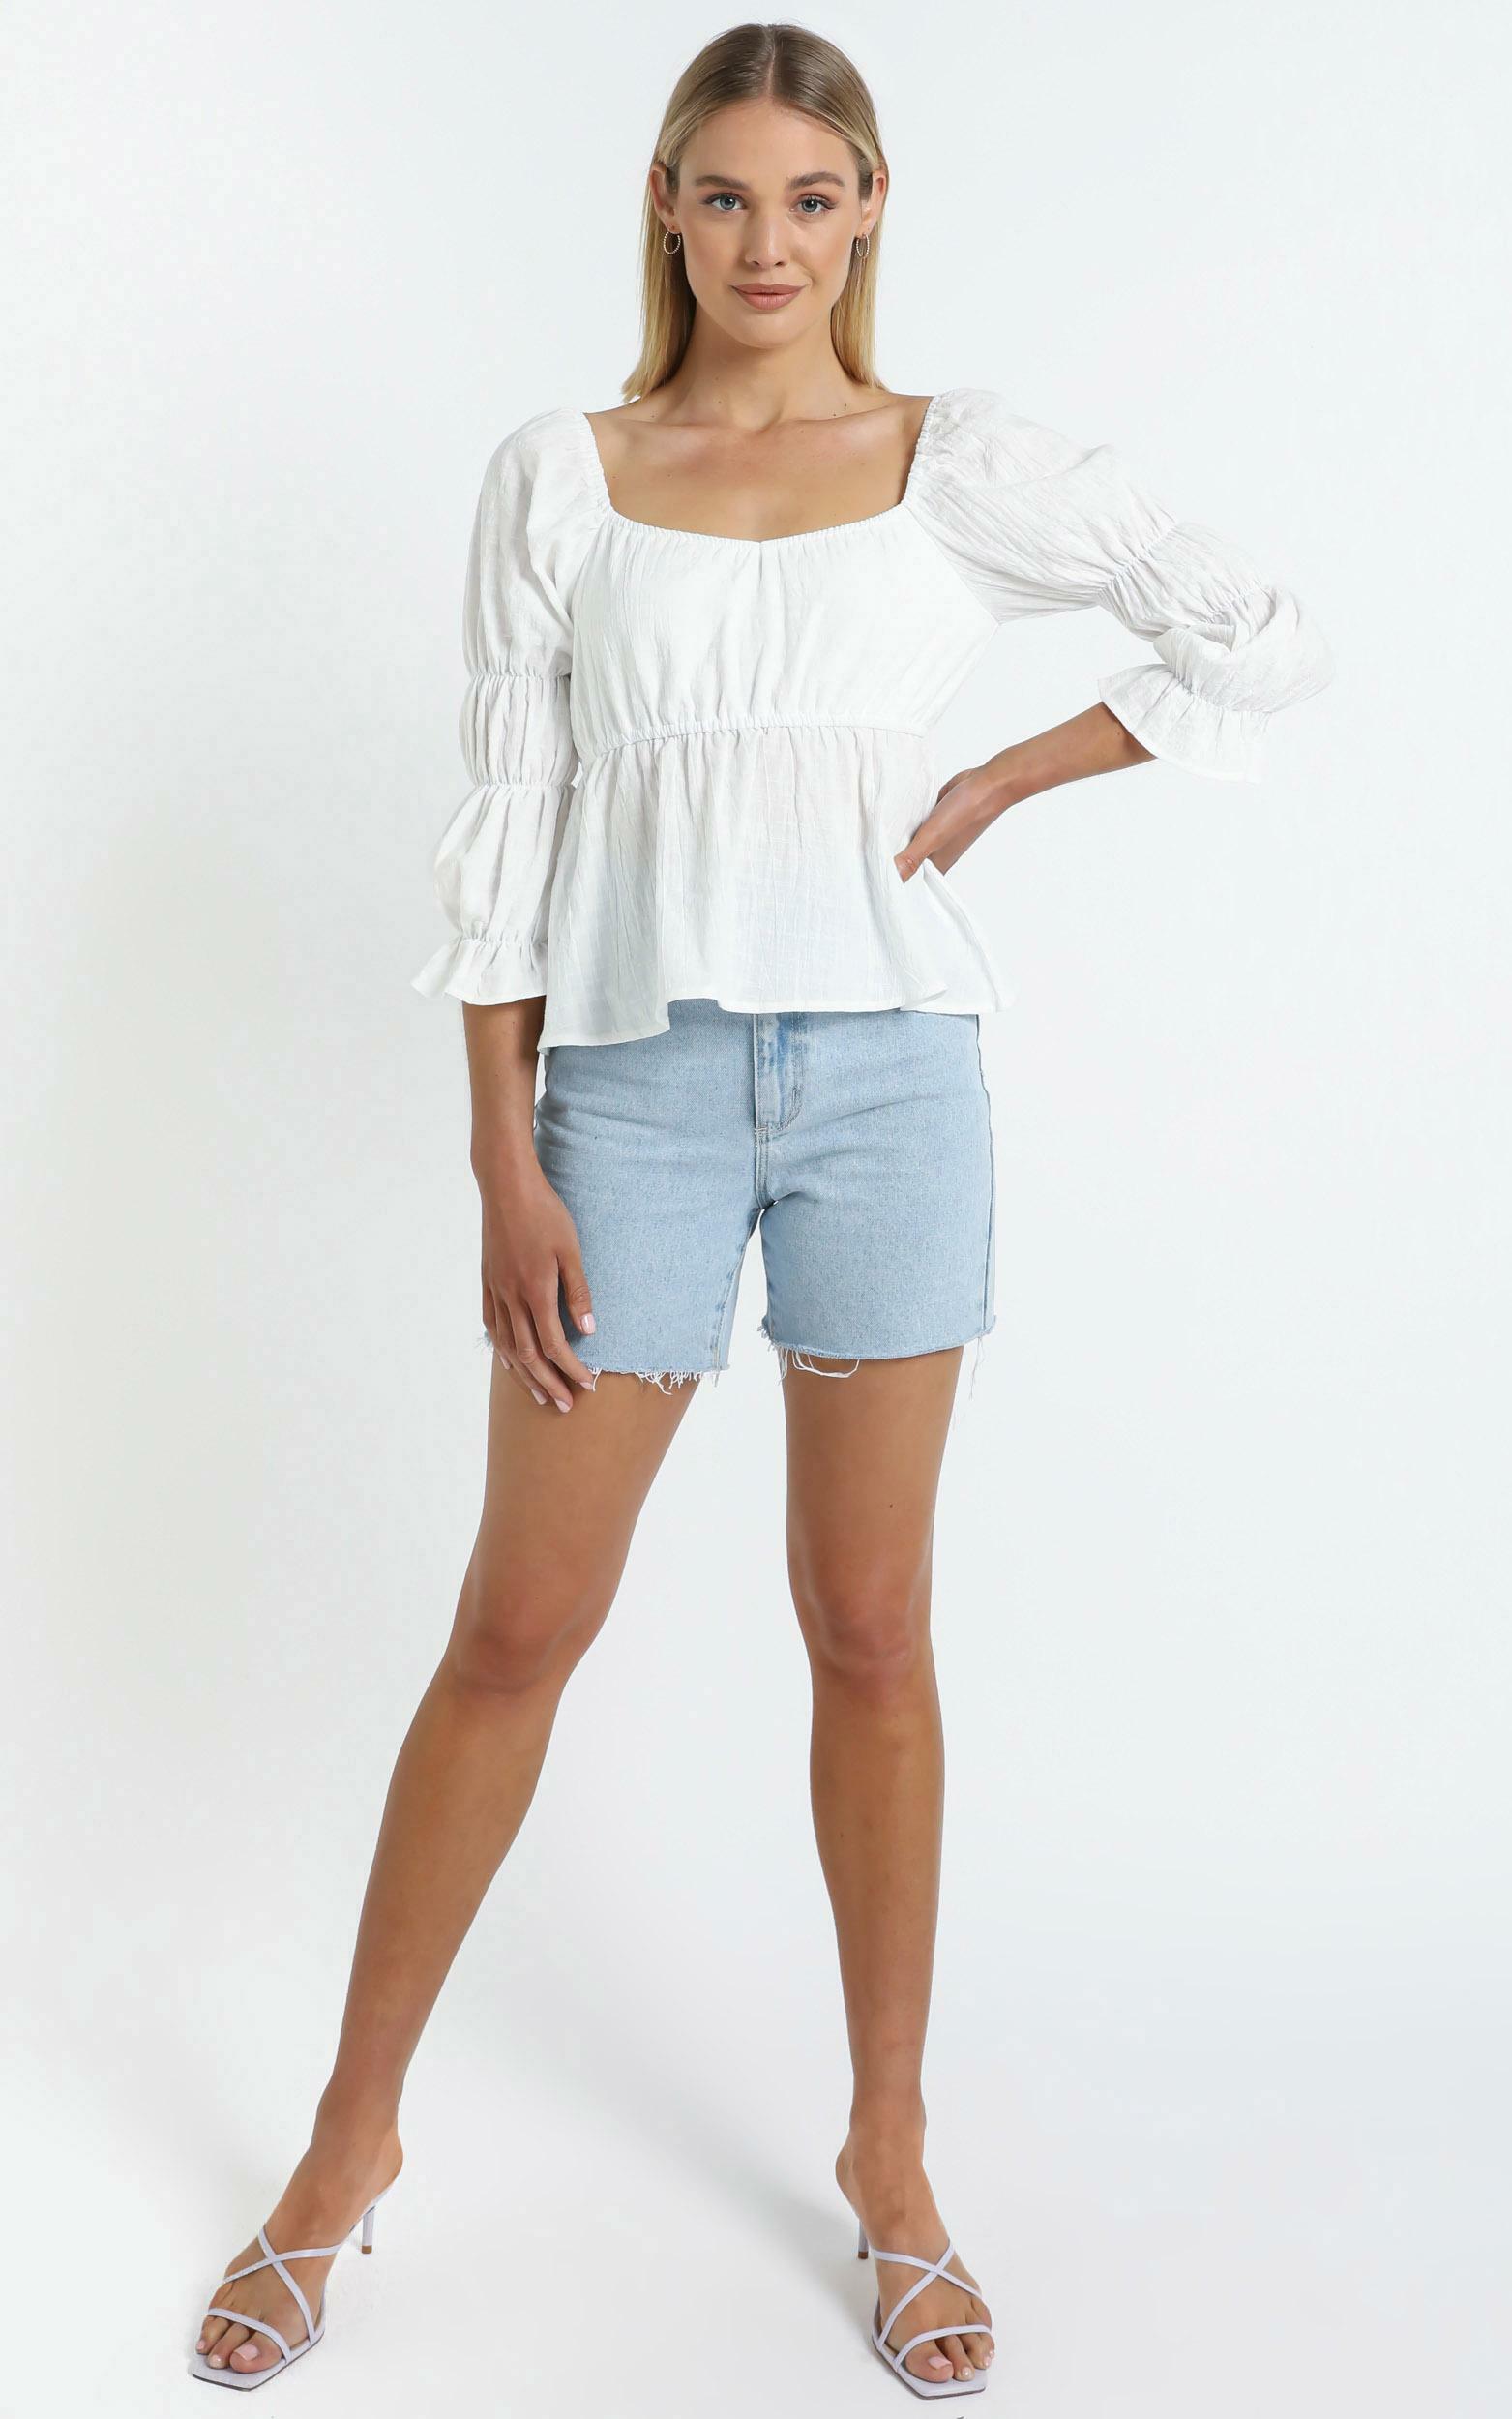 Mullins Top in White - 14 (XL), White, hi-res image number null